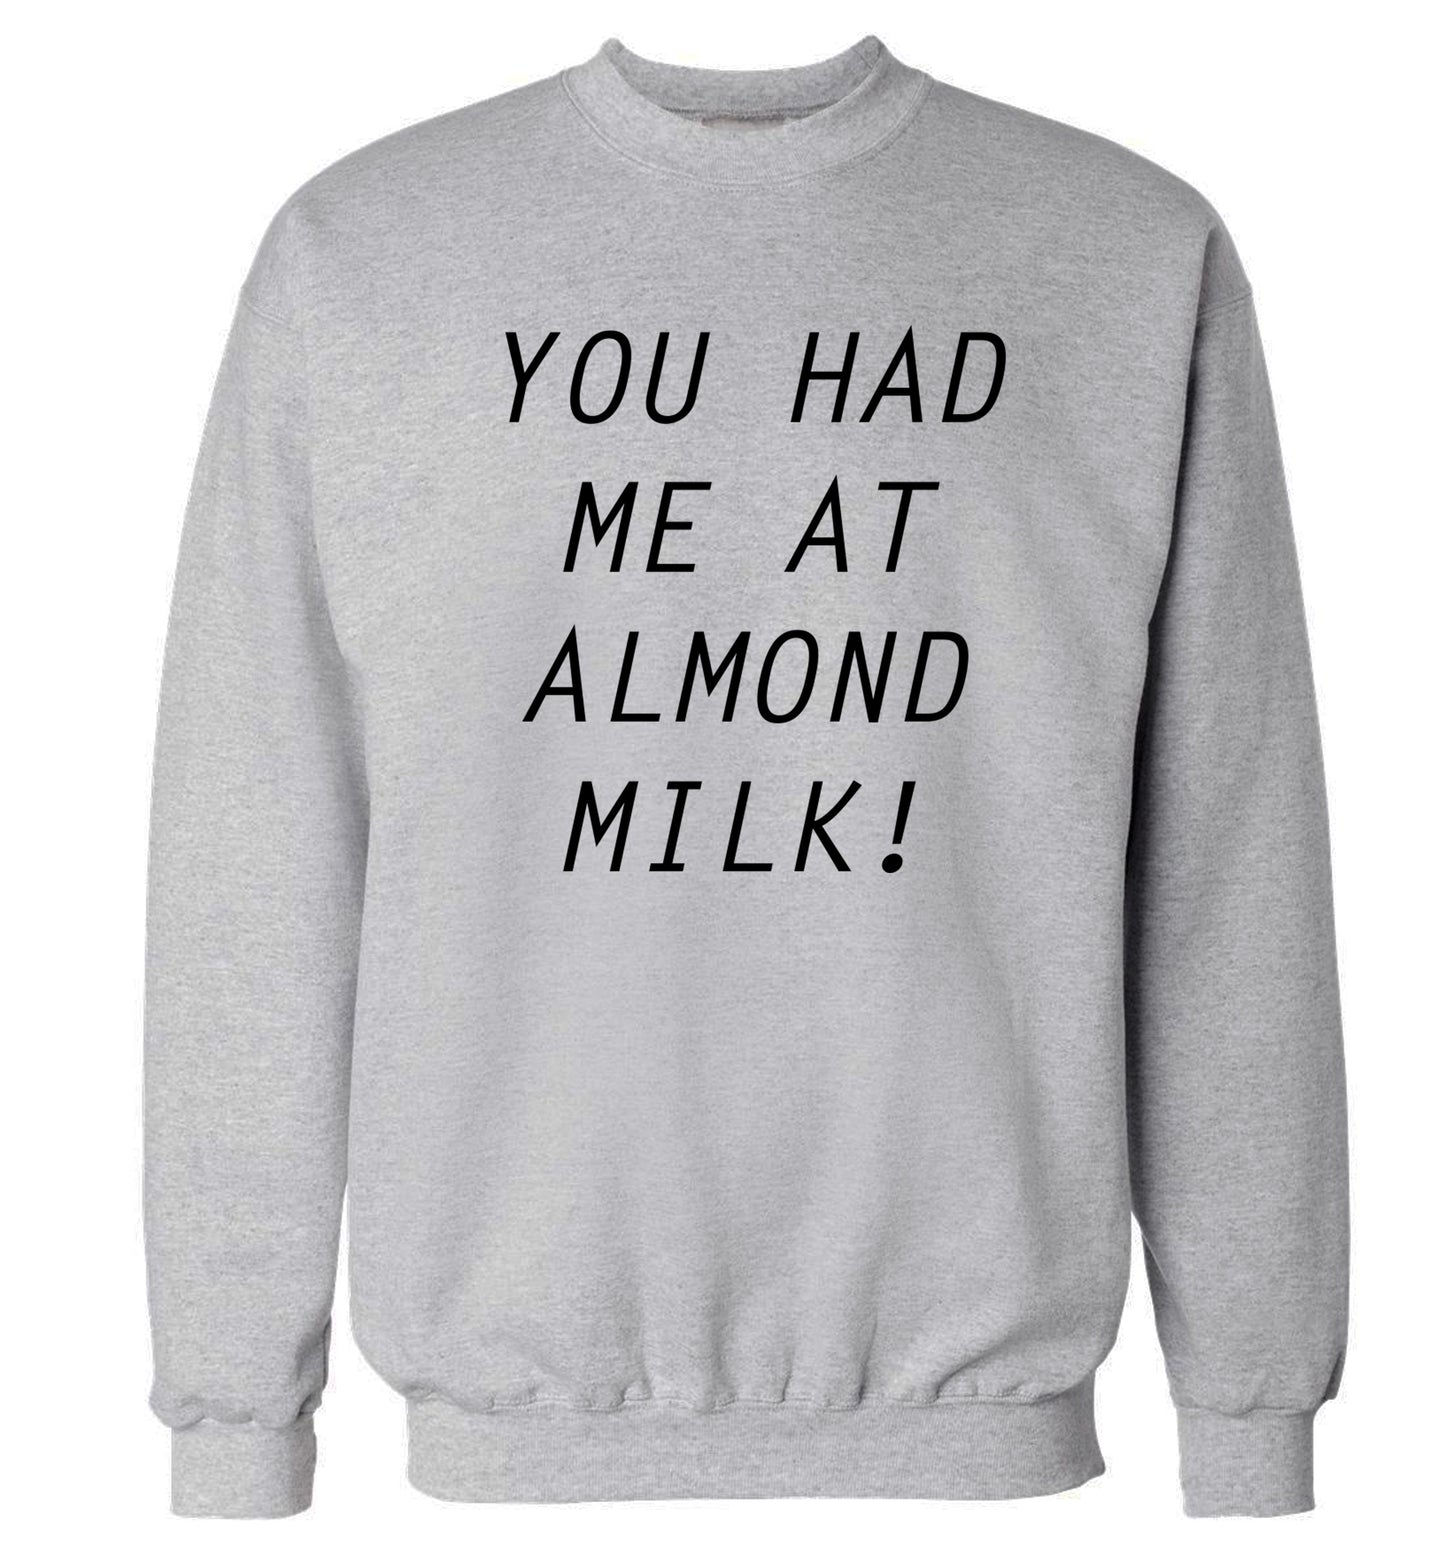 You had me at almond milk Adult's unisex grey Sweater 2XL